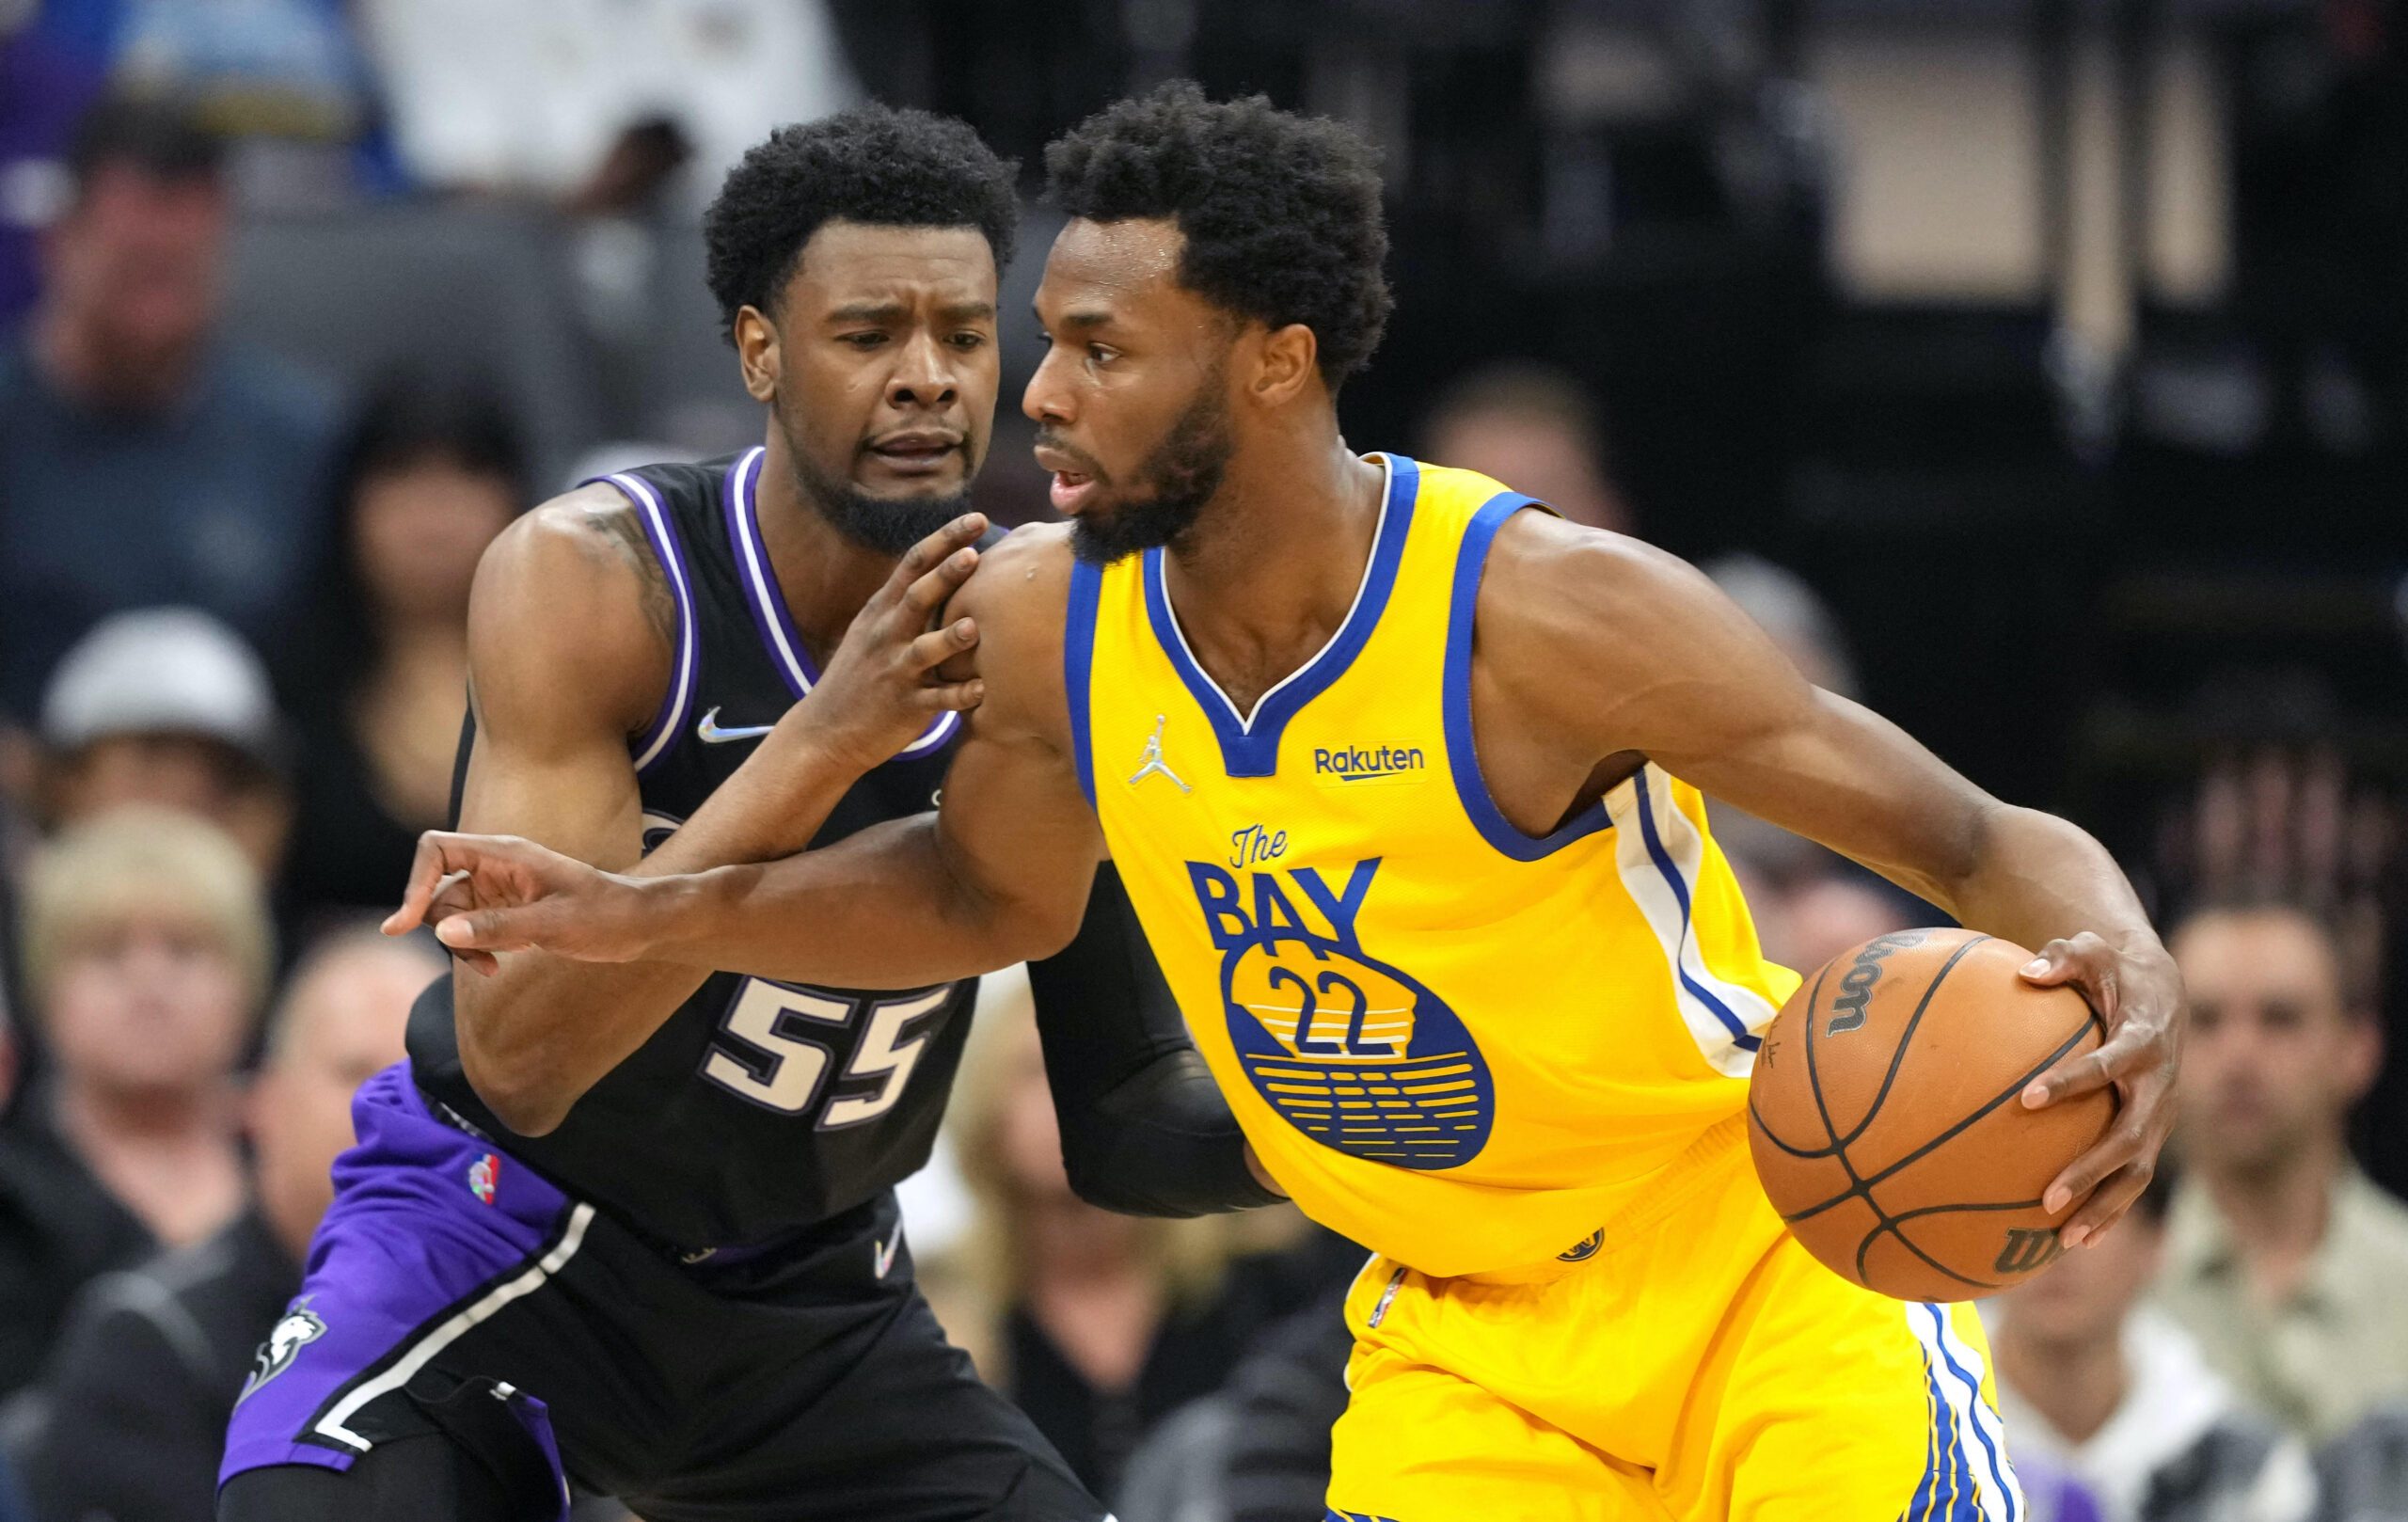 Kings rest key players as Warriors try to secure playoff position